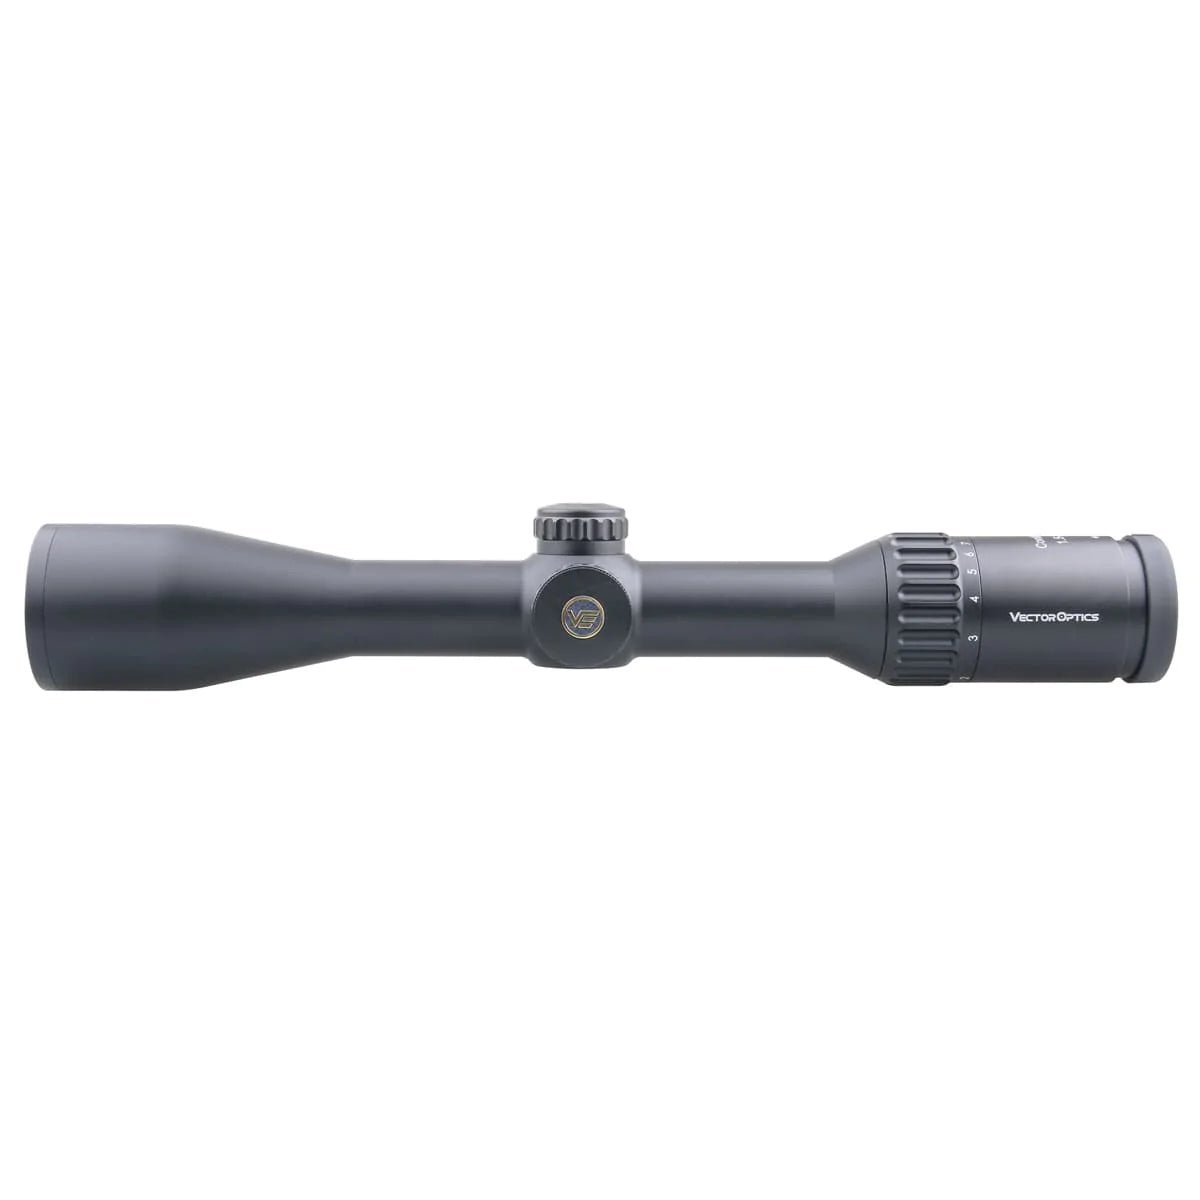 Continental, 1.5-9 X 42, SFP, Riflescope for Hunting